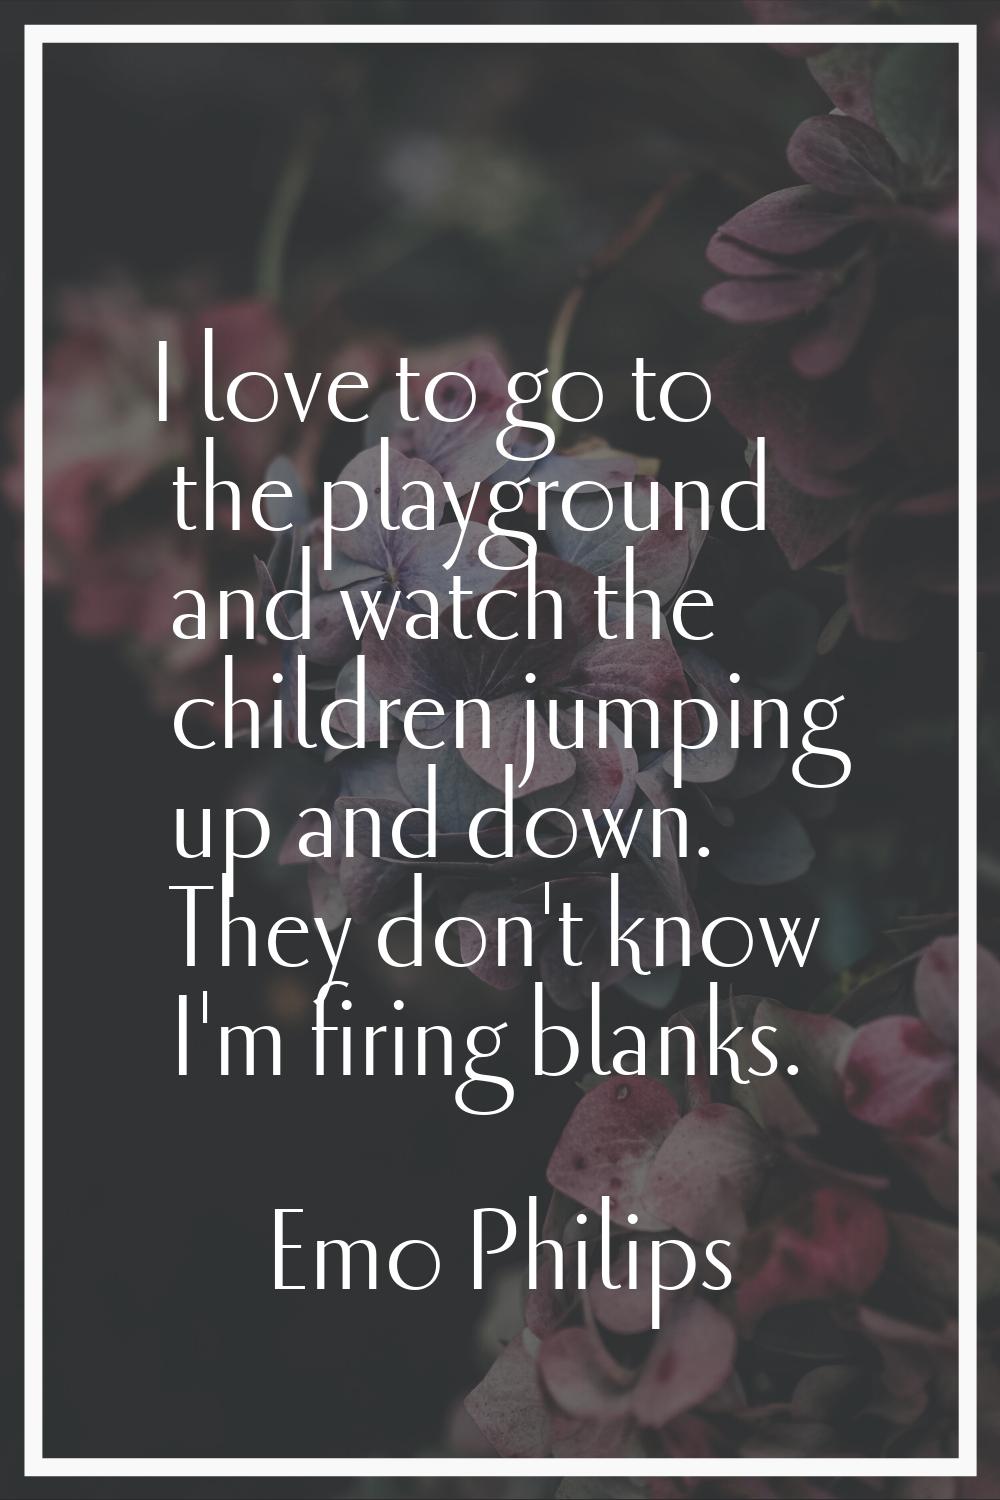 I love to go to the playground and watch the children jumping up and down. They don't know I'm firi